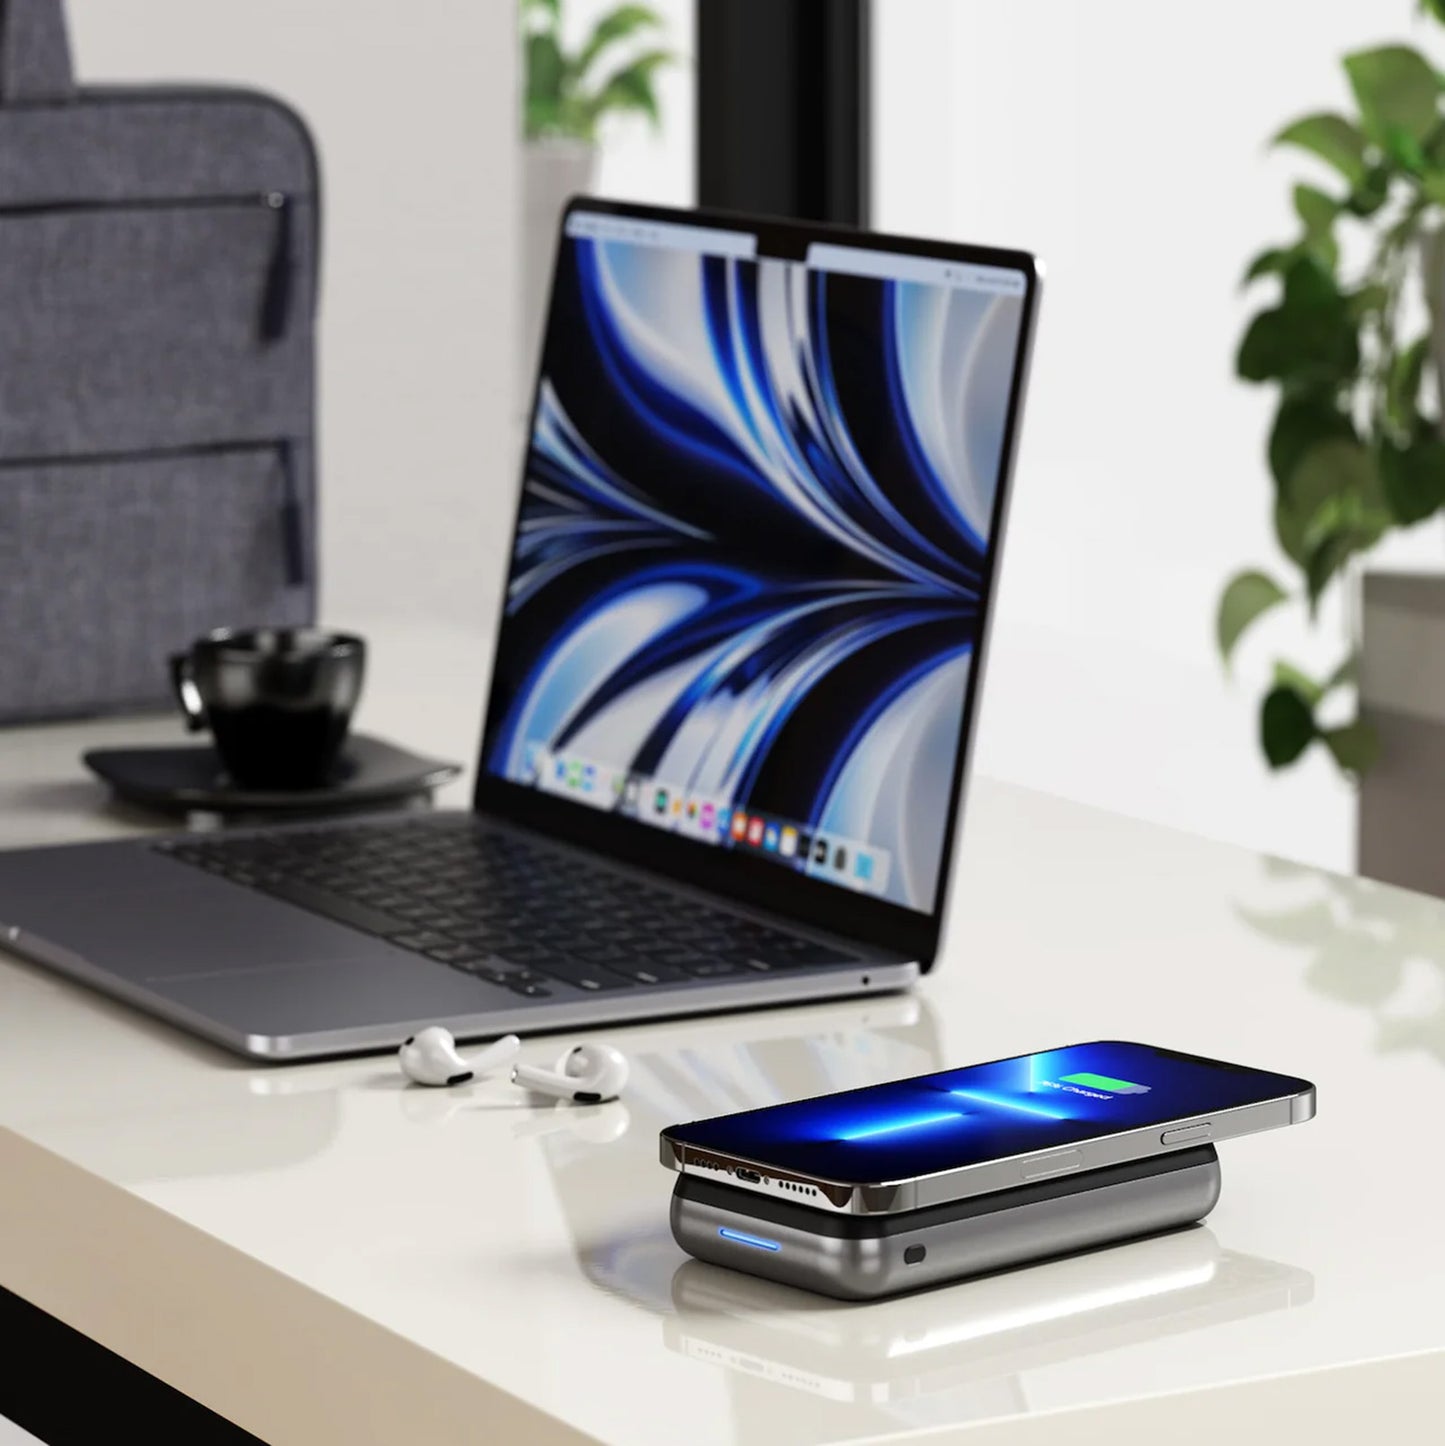 Satechi Duo Wireless Charger Power Stand